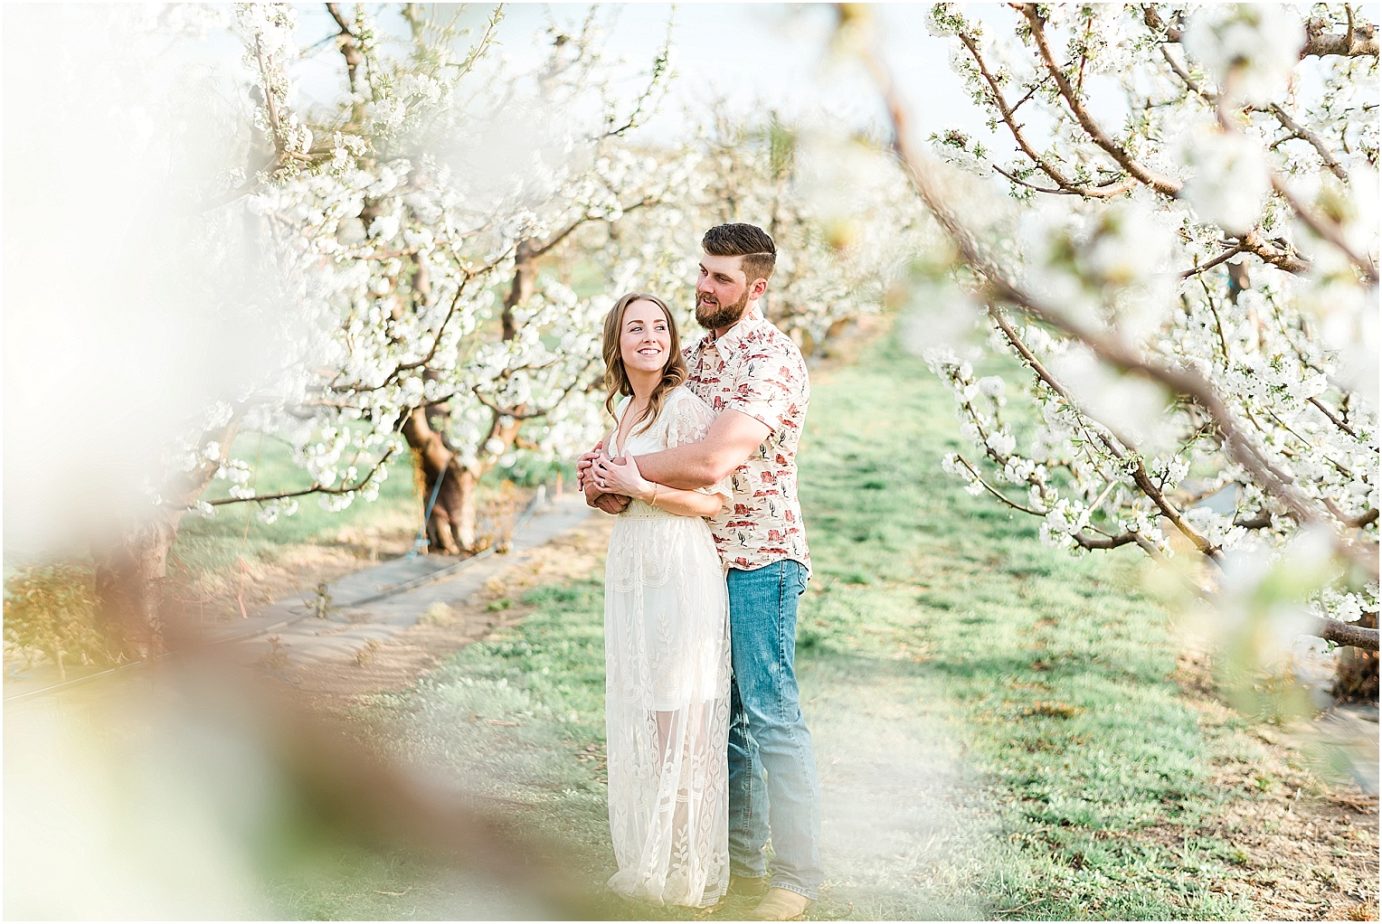 eastern washington engagement session PNW photographer Travis and arianna hugging in a cherry orchard